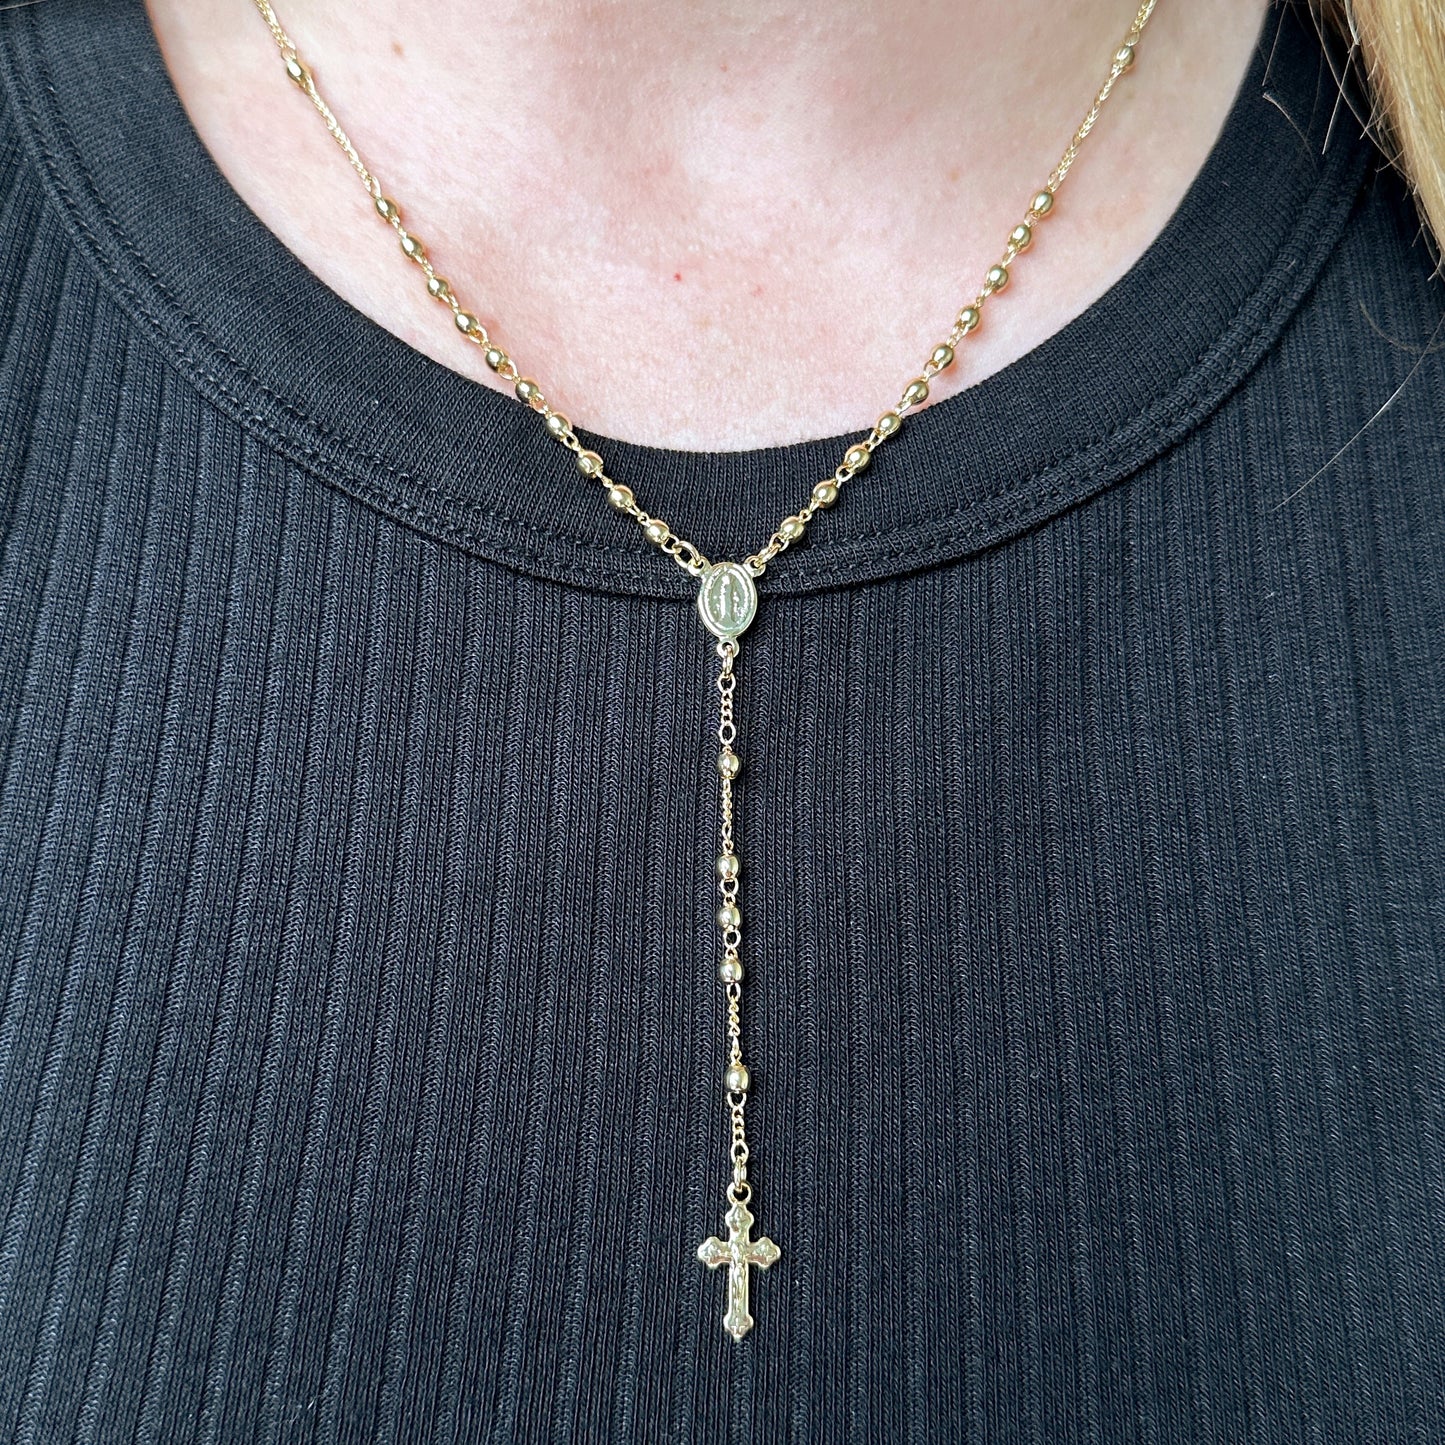 18k gold filled rosary featuring Mother of Grace and little cross